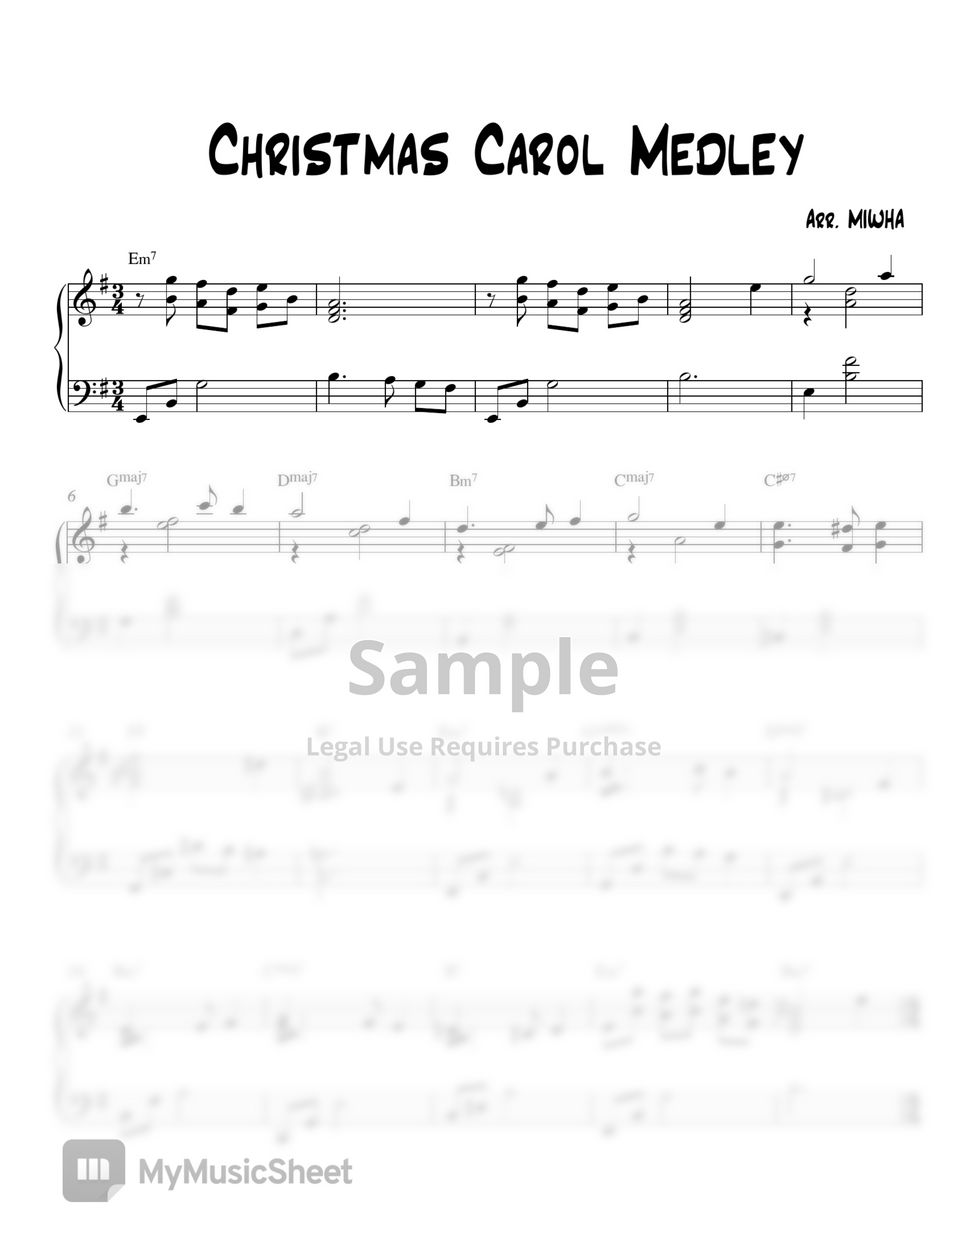 Christmas Hymns Medley - What Child Is This/Away in a manger/ Angels we have heard on high (Jazz Style) by MIWHA